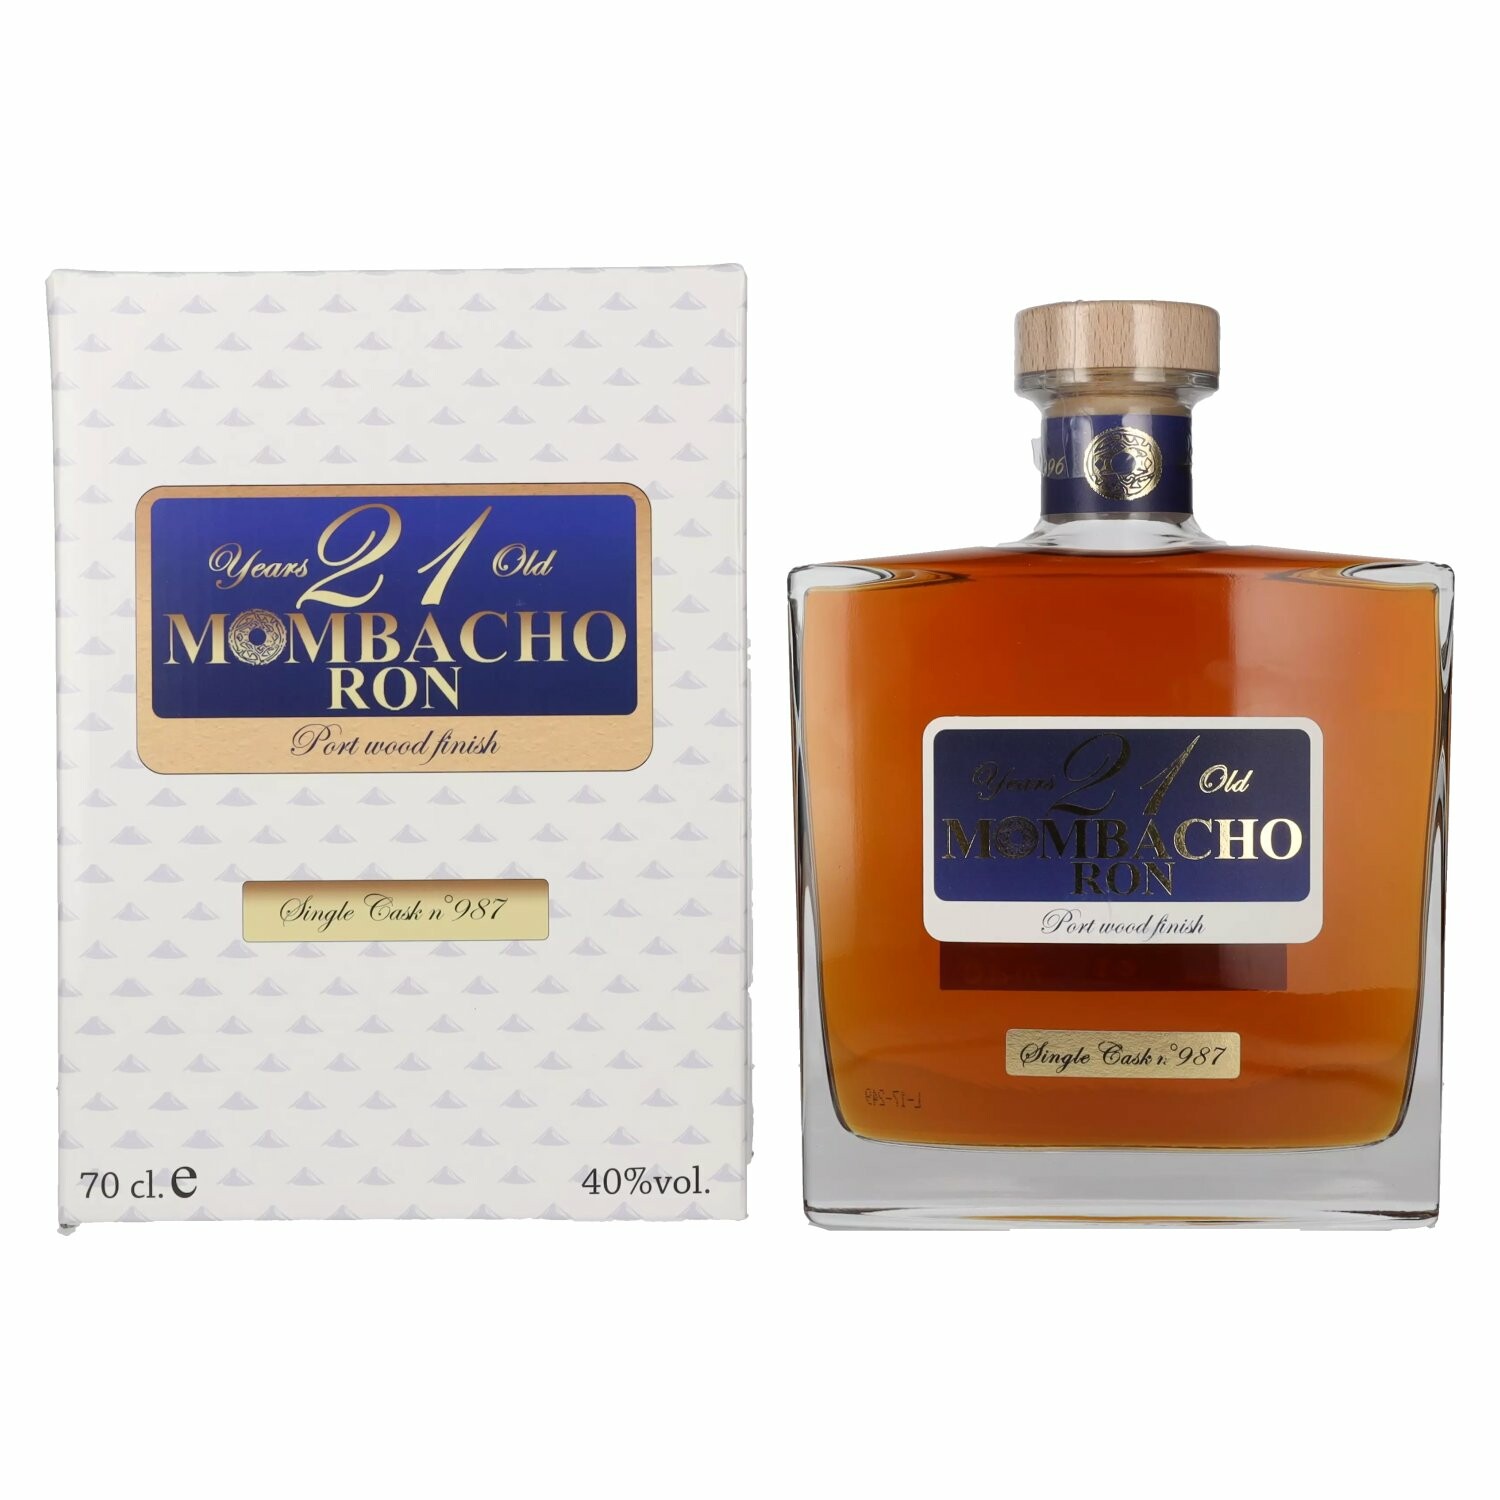 Mombacho Ron 21 Years Old Port Wood Finish 40% Vol. 0,7l in Giftbox